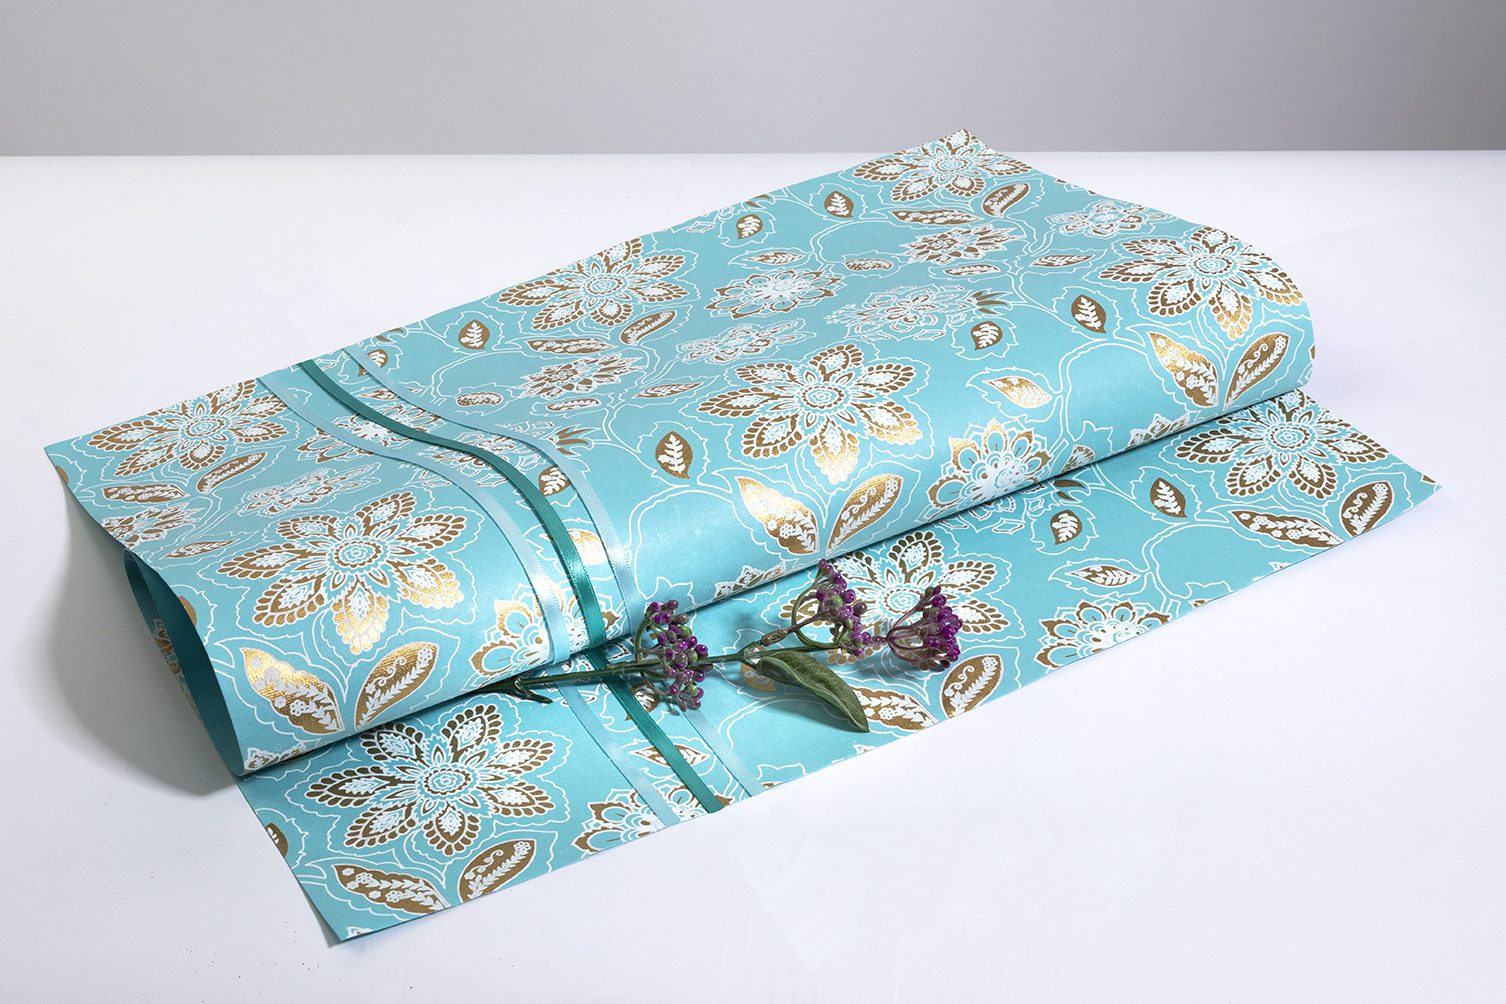 Wrapping paper blue dahlia print is eco friendly, handmade & sustainable.